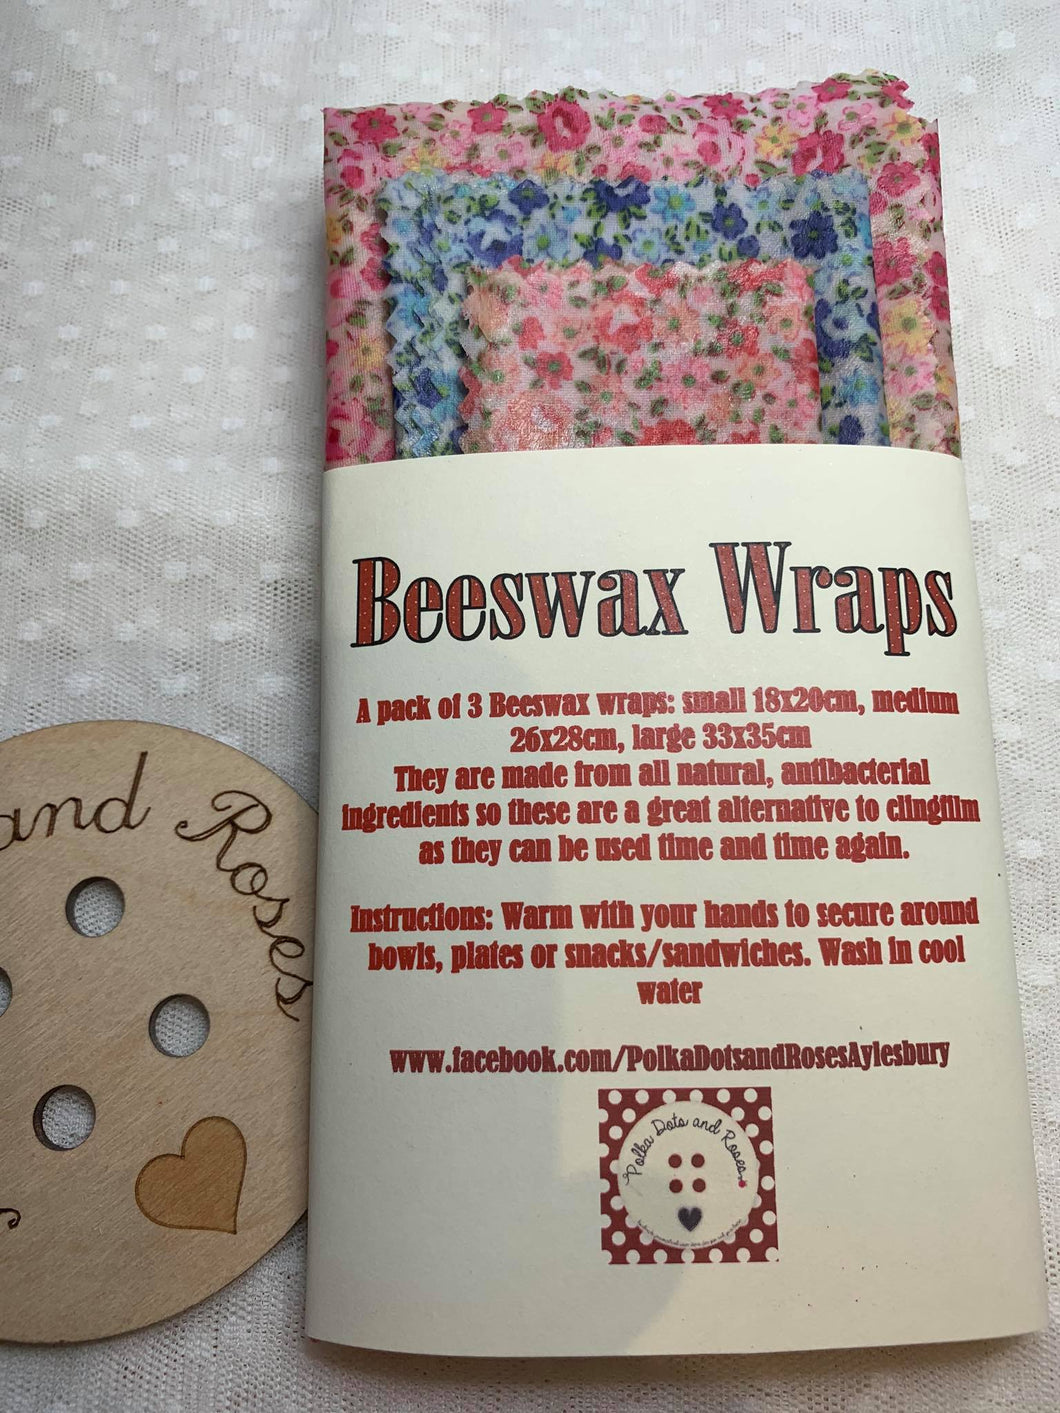 My Beeswax Wraps come in a set of 3 - small (18x20cm), medium (26x28cm) and large (33x35cm)  Or packs of 3 of each size.  They are made from all natural materials and are an eco friendly alternative to cling film as they can be used time and time again.  Just warm the wraps with your hands to secure around bowl, plates or snacks/sandwiches.  They are naturally antibacterial which gives you peace of mind (although I wouldn't recommend using them with raw meat/fish)  Wash in cool water.